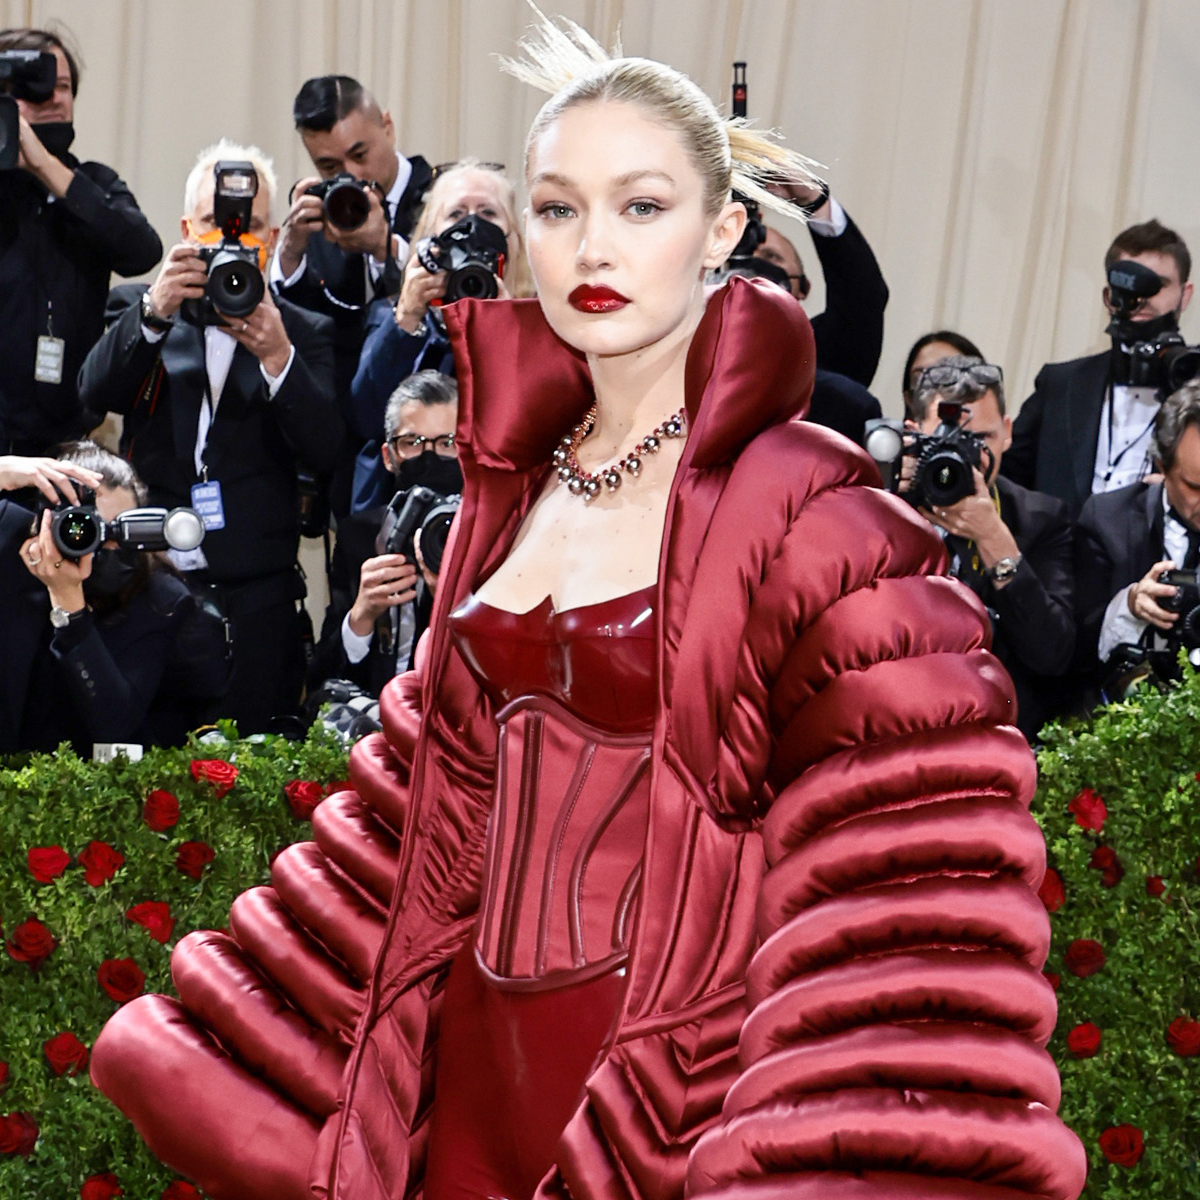 Gigi Hadid Wore a Bold Red Leather Catsuit and Corset to the 2022